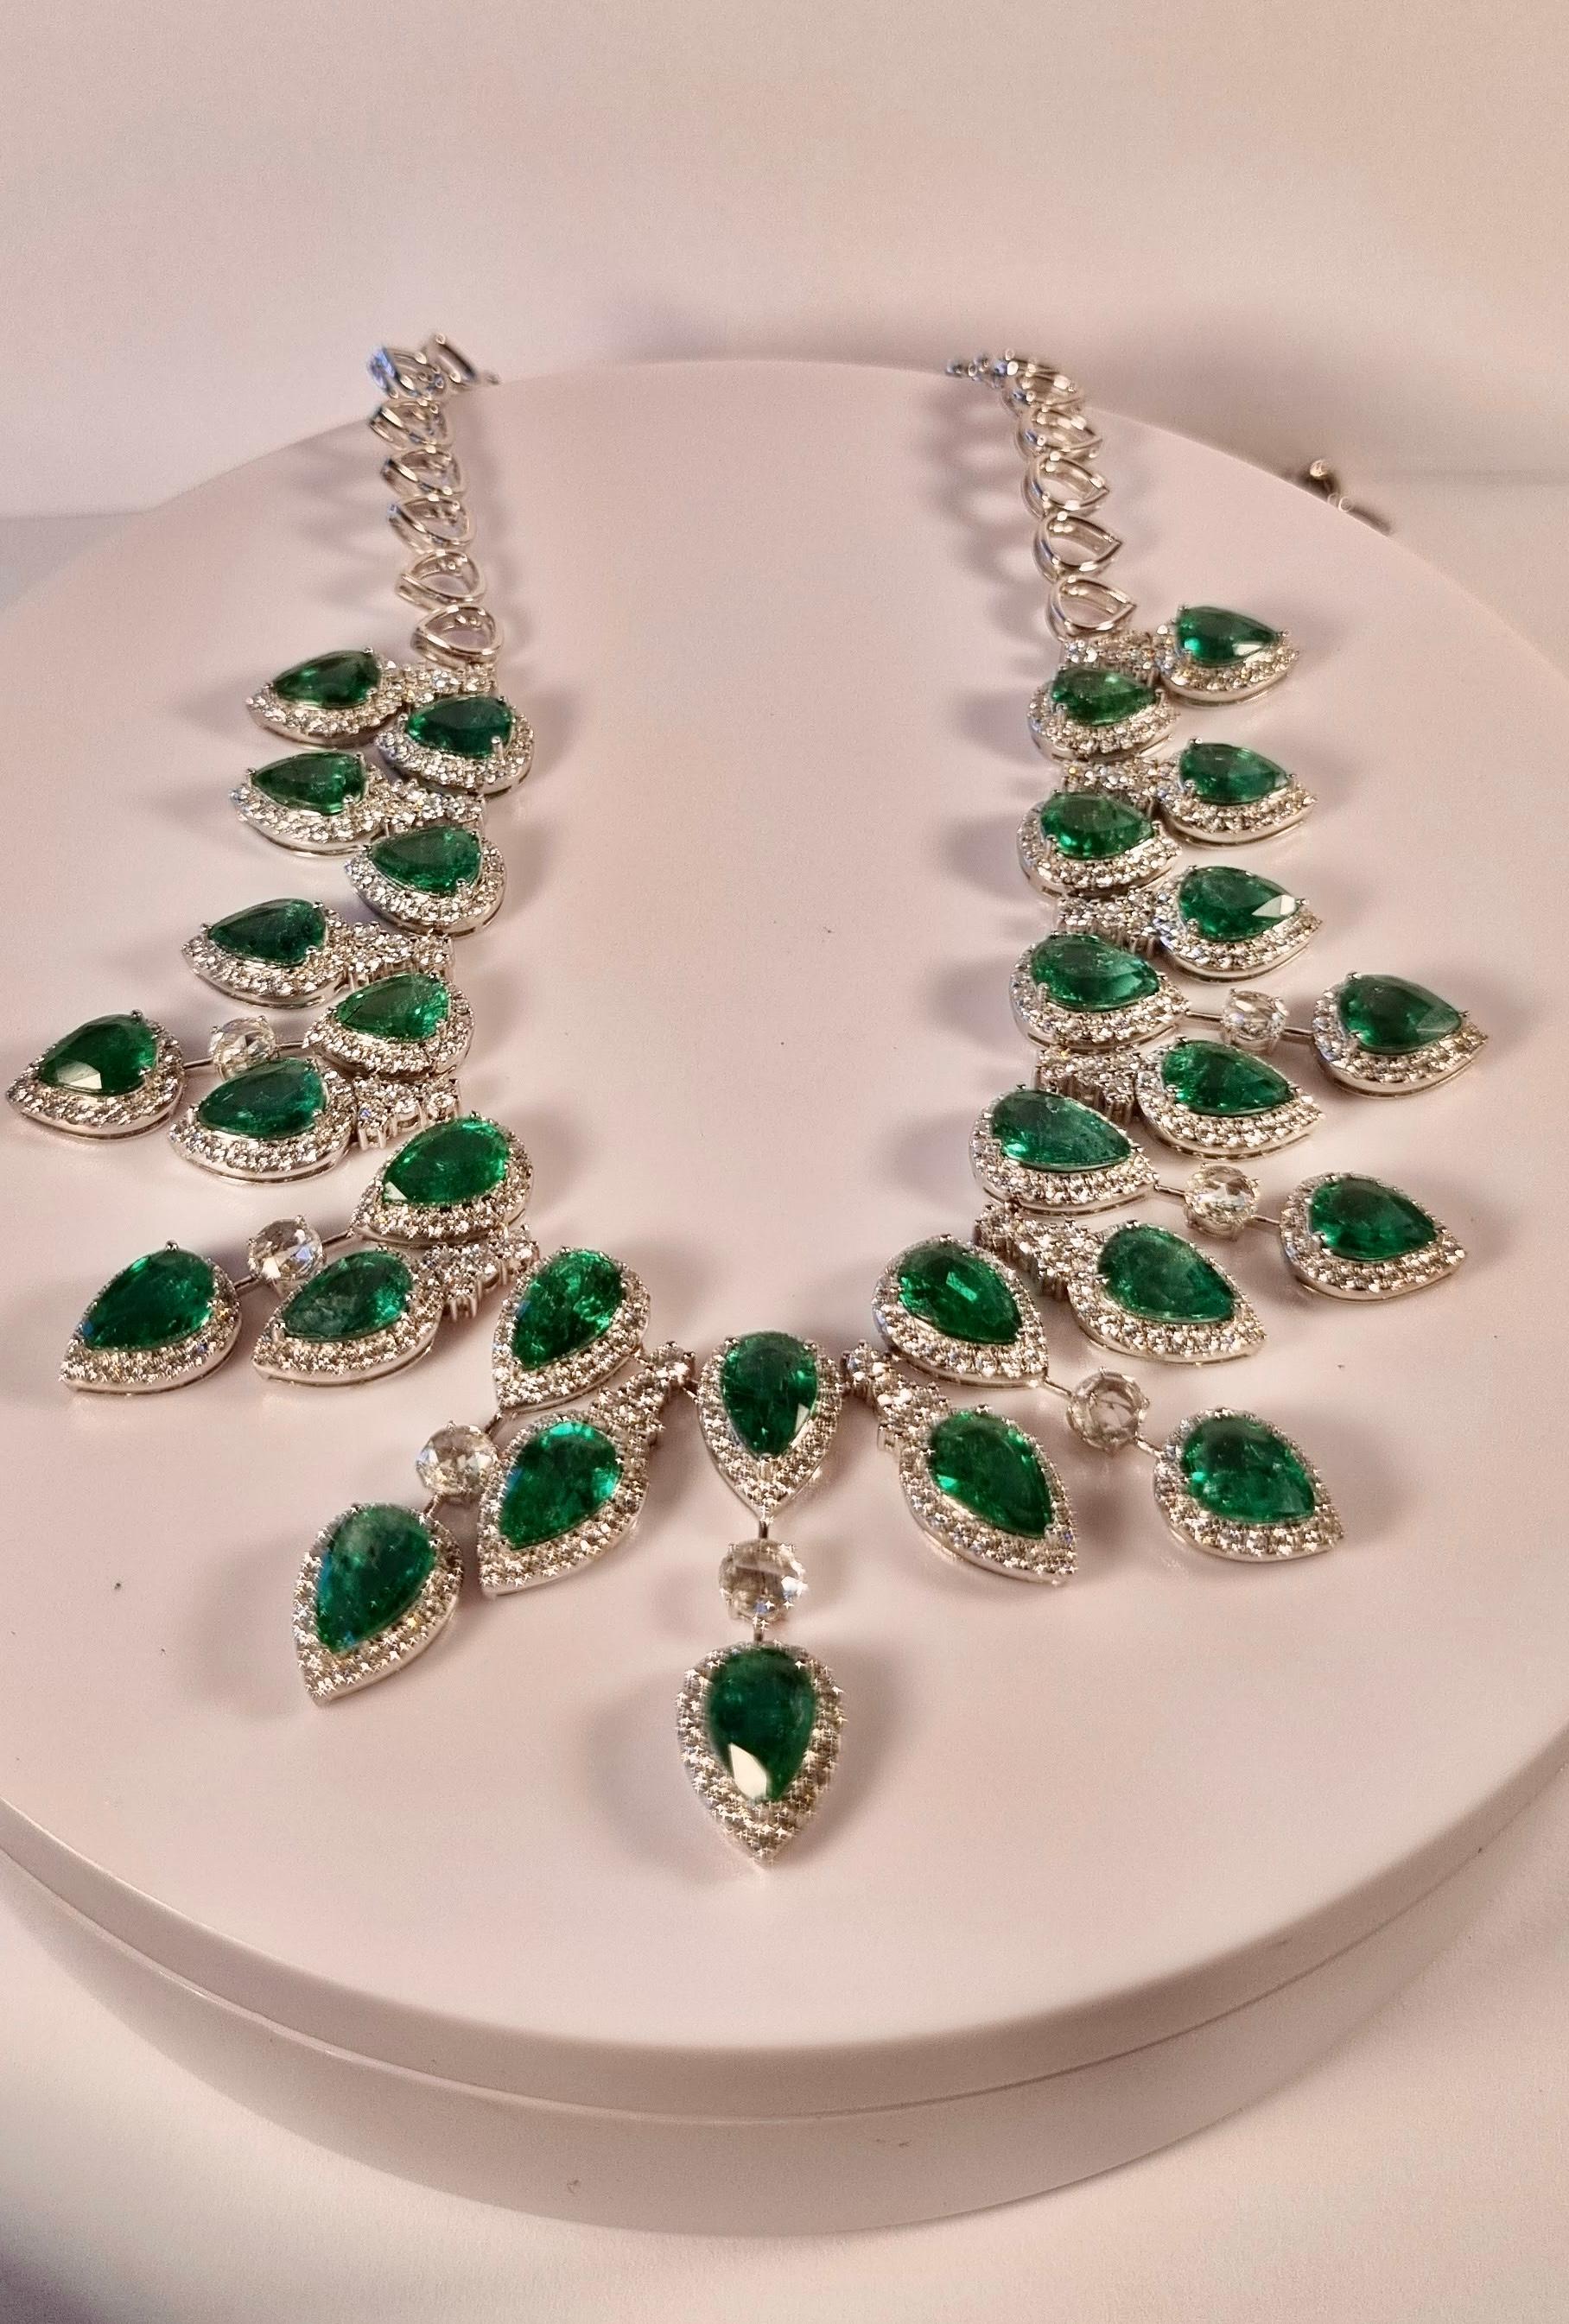 Colombian Emerald Earrings with Diamonds and Yellow Gold

Irama Pradera is a Young designer from Spain that searches always for the best gems and combines classic with contemporary mounting and styles.
She creates many Jewels in her atelier in